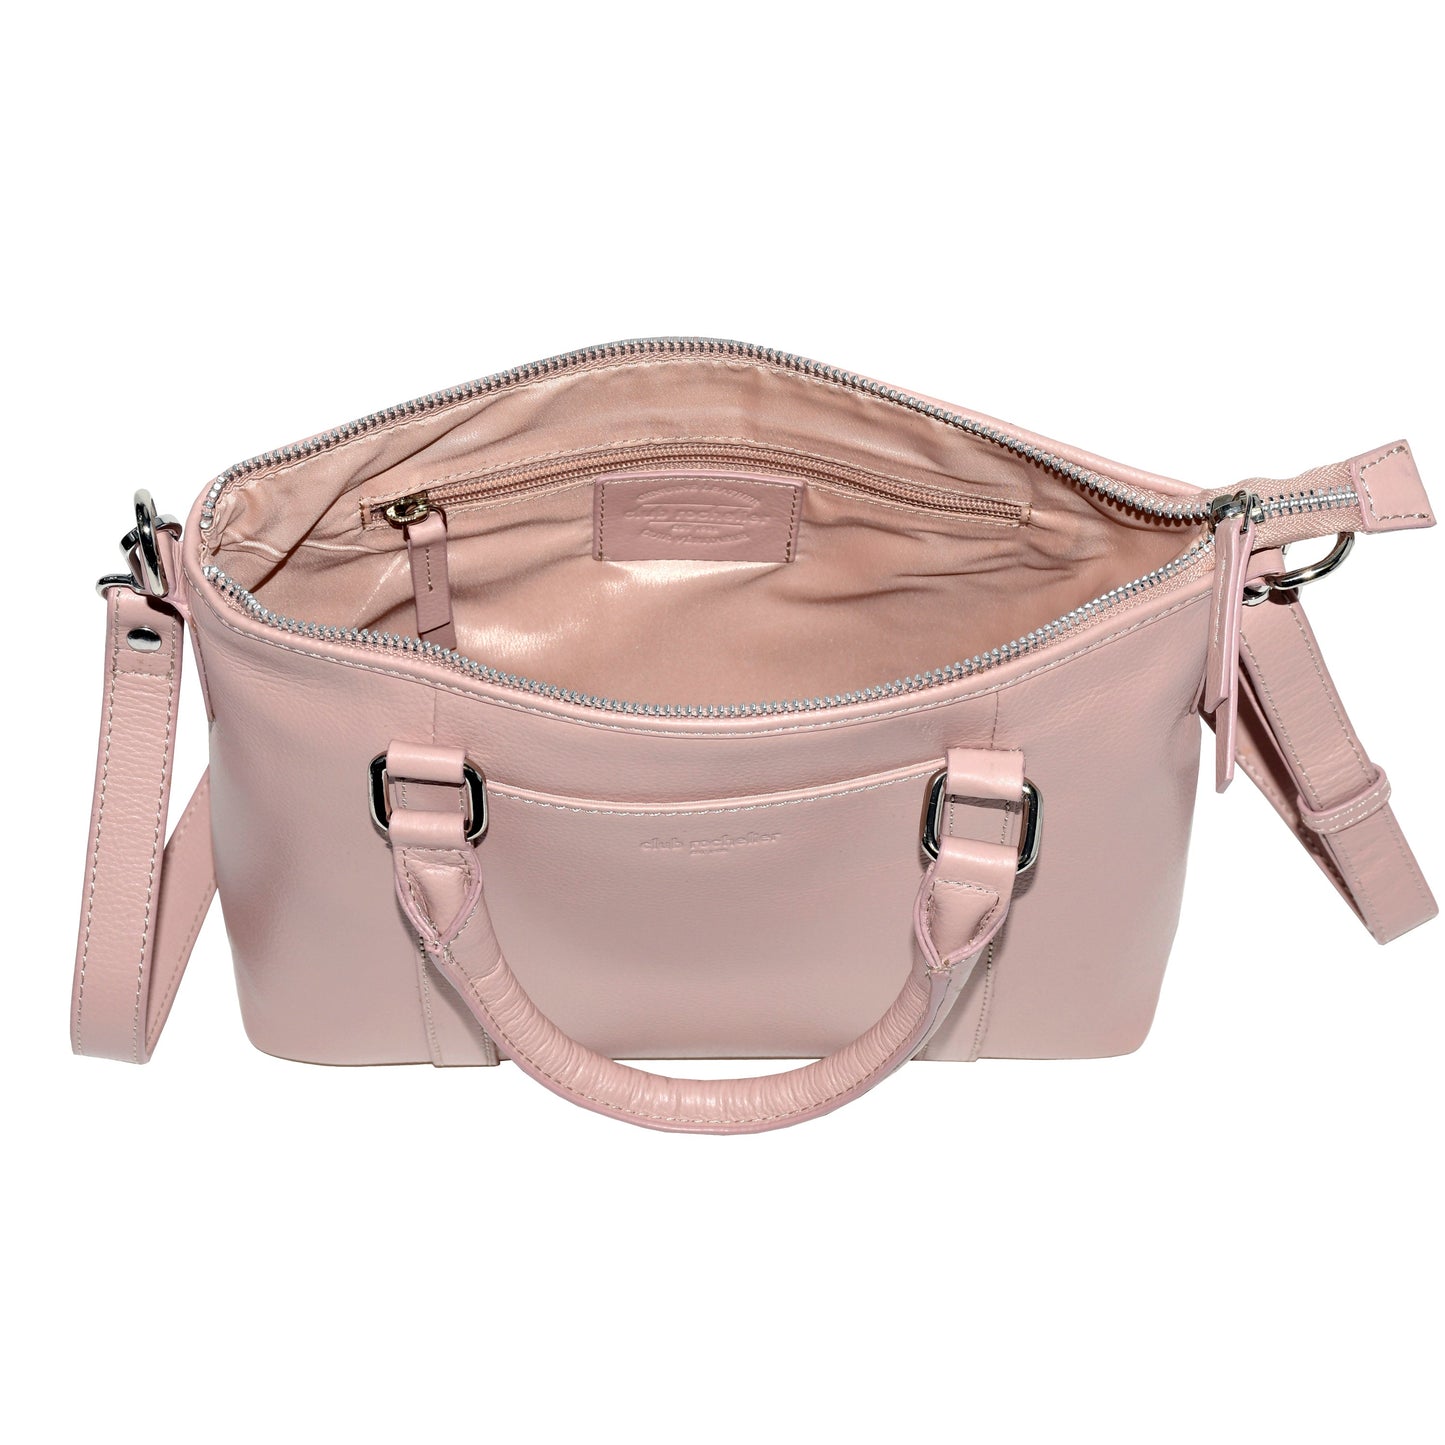 Leather Crossbody Bag with Tops Handles